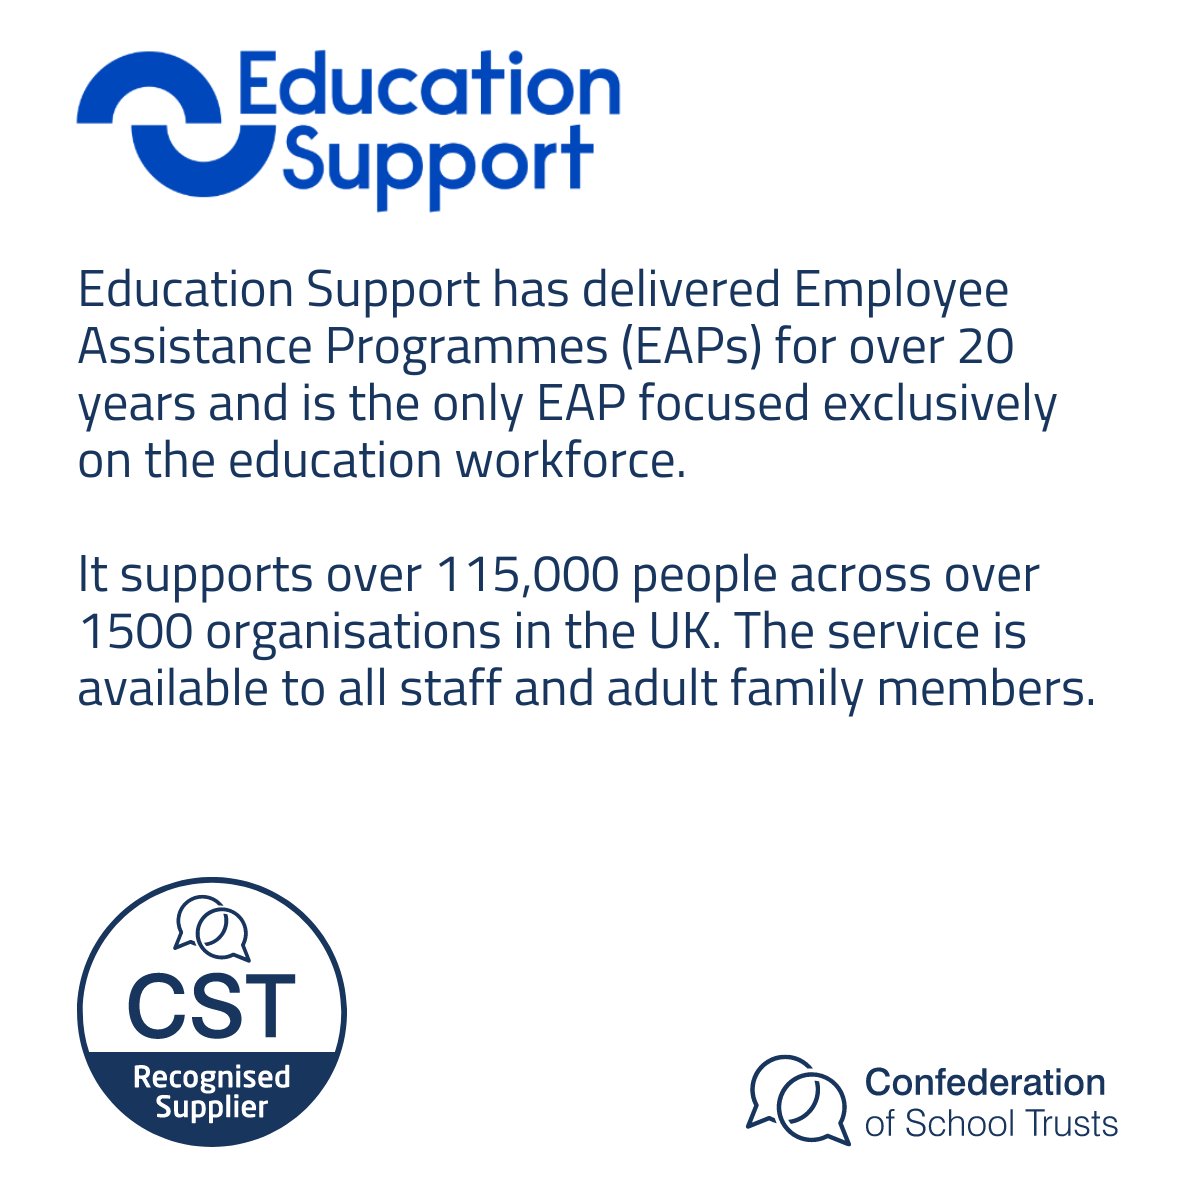 We are also pleased to introduce @EdSupportUK as another new recognised supplier. Education Support provides services to improve mental health and wellbeing amongst education staff. Find out more: zurl.co/MIWA